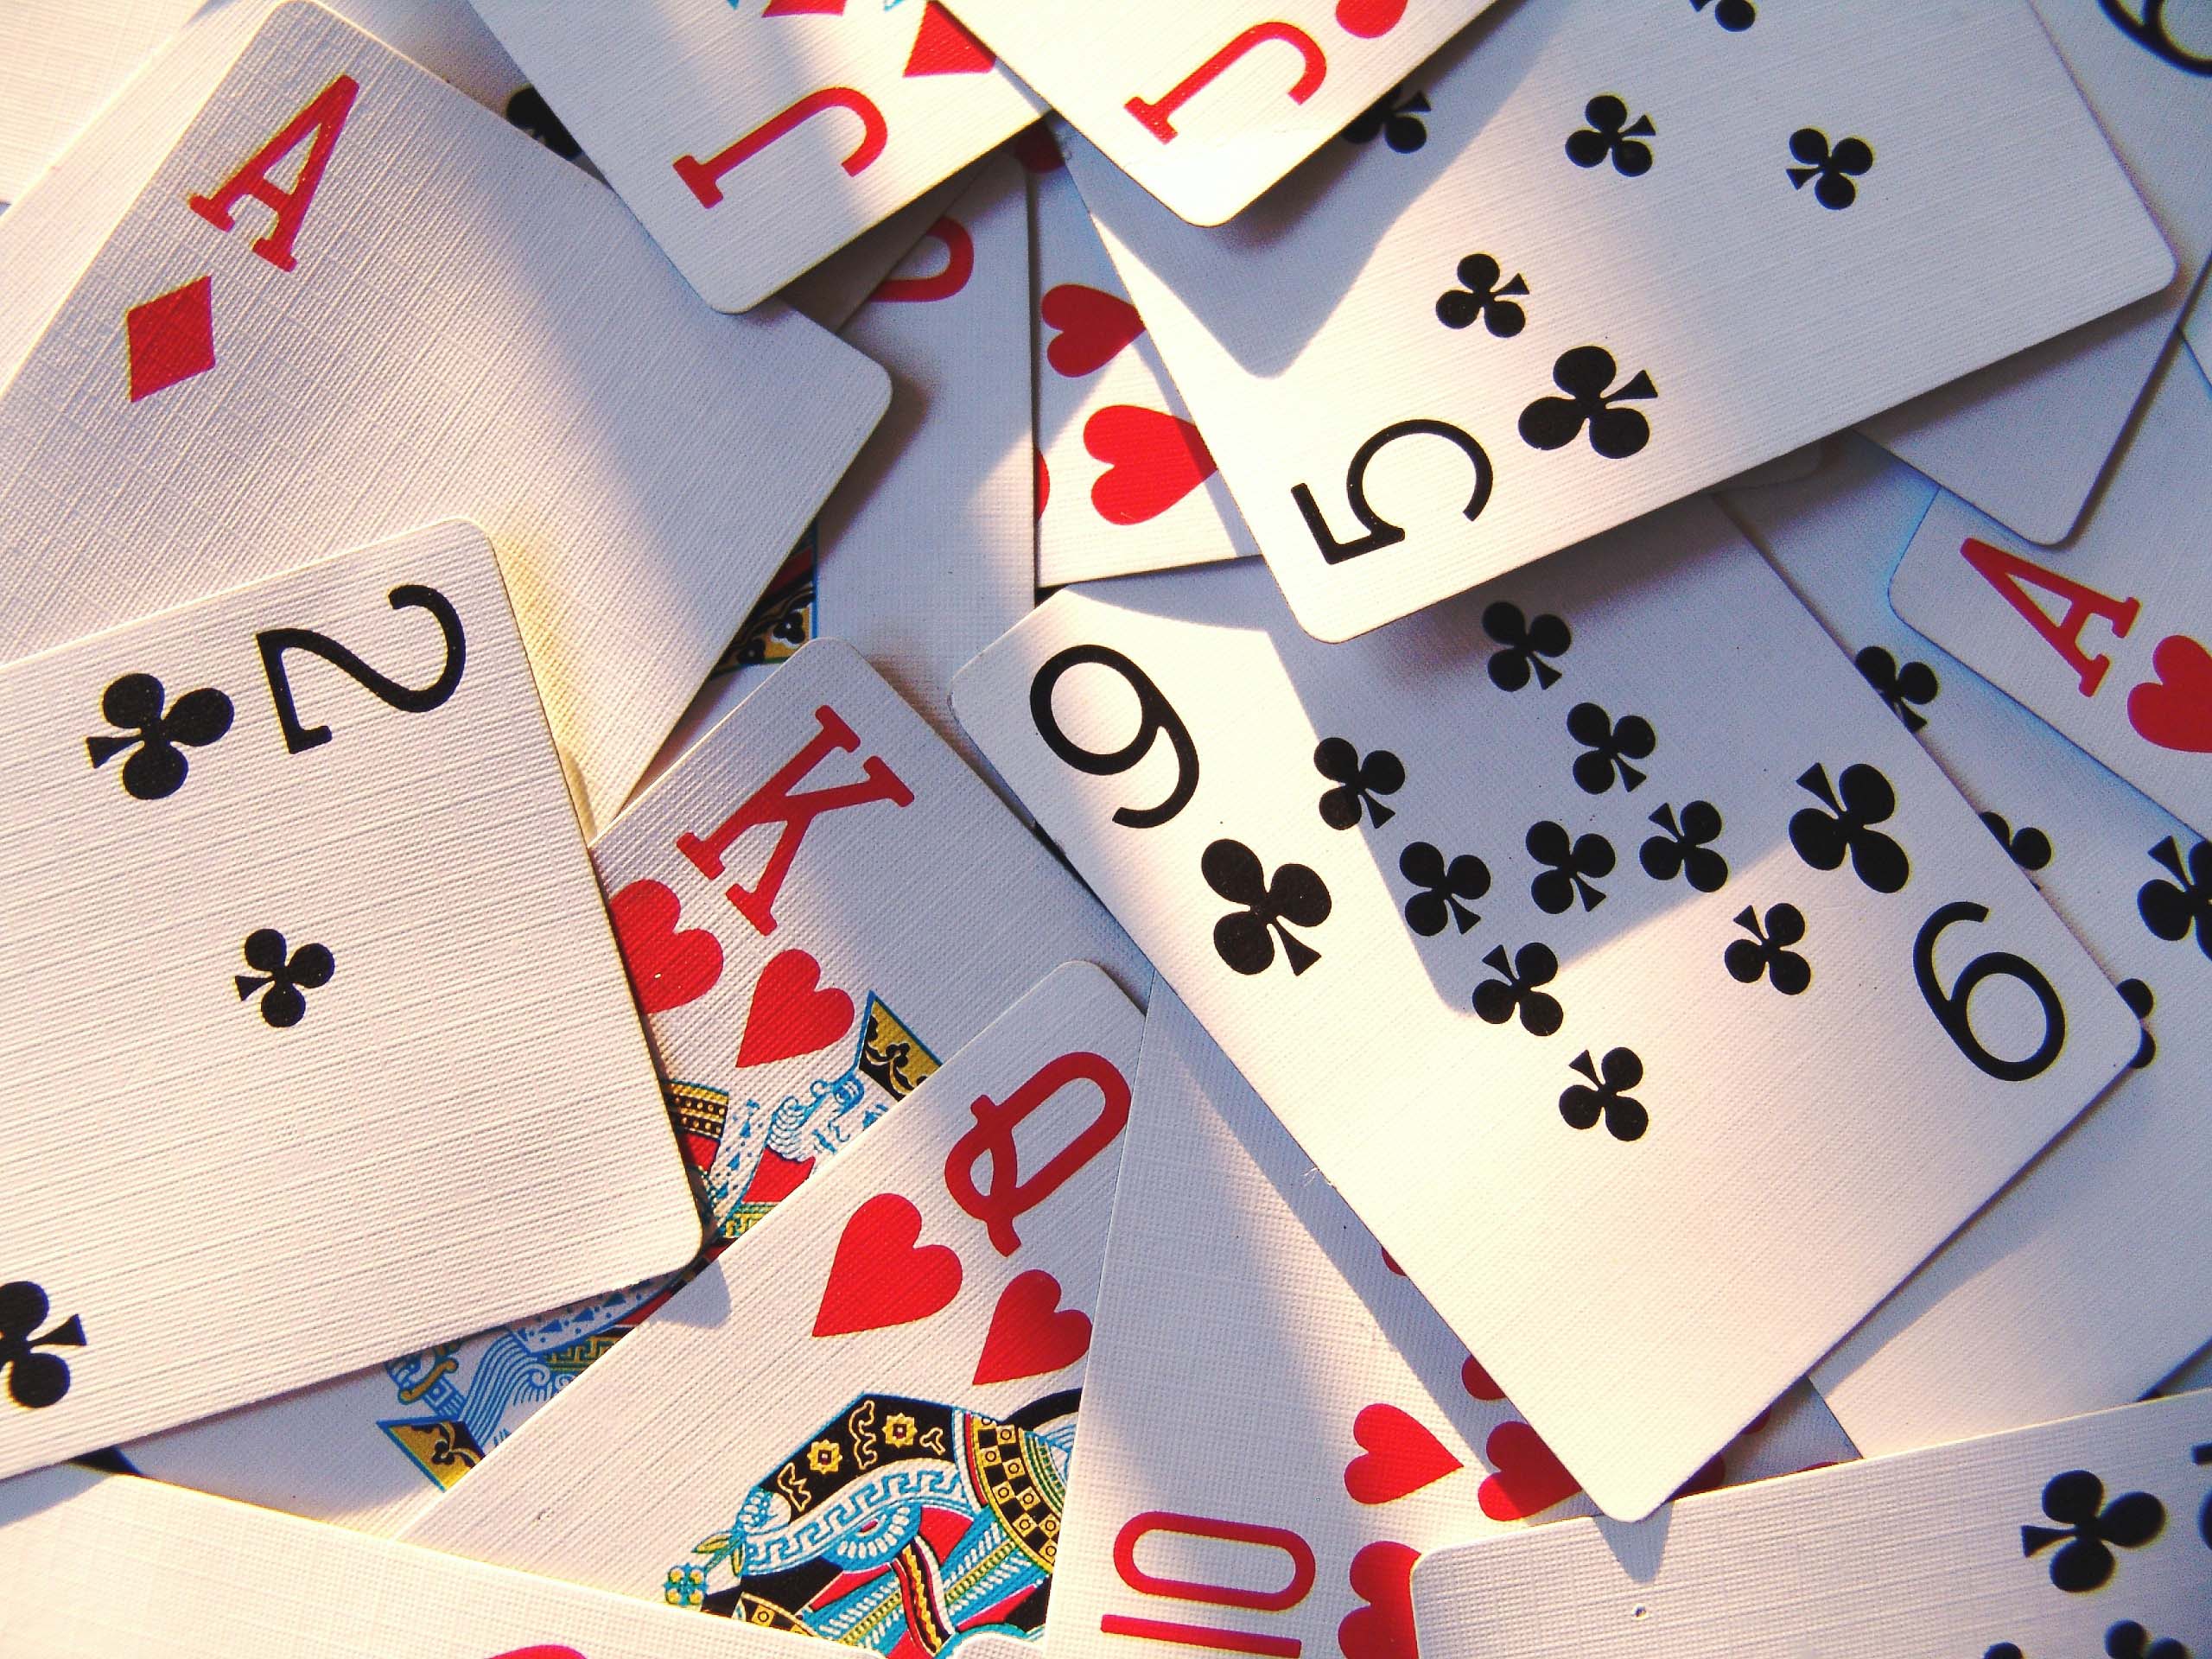 Would you like to play Canasta with like-minded folk at Menai Library? Join our weekly Canasta group. All levels of ability welcome; all equipment provided.